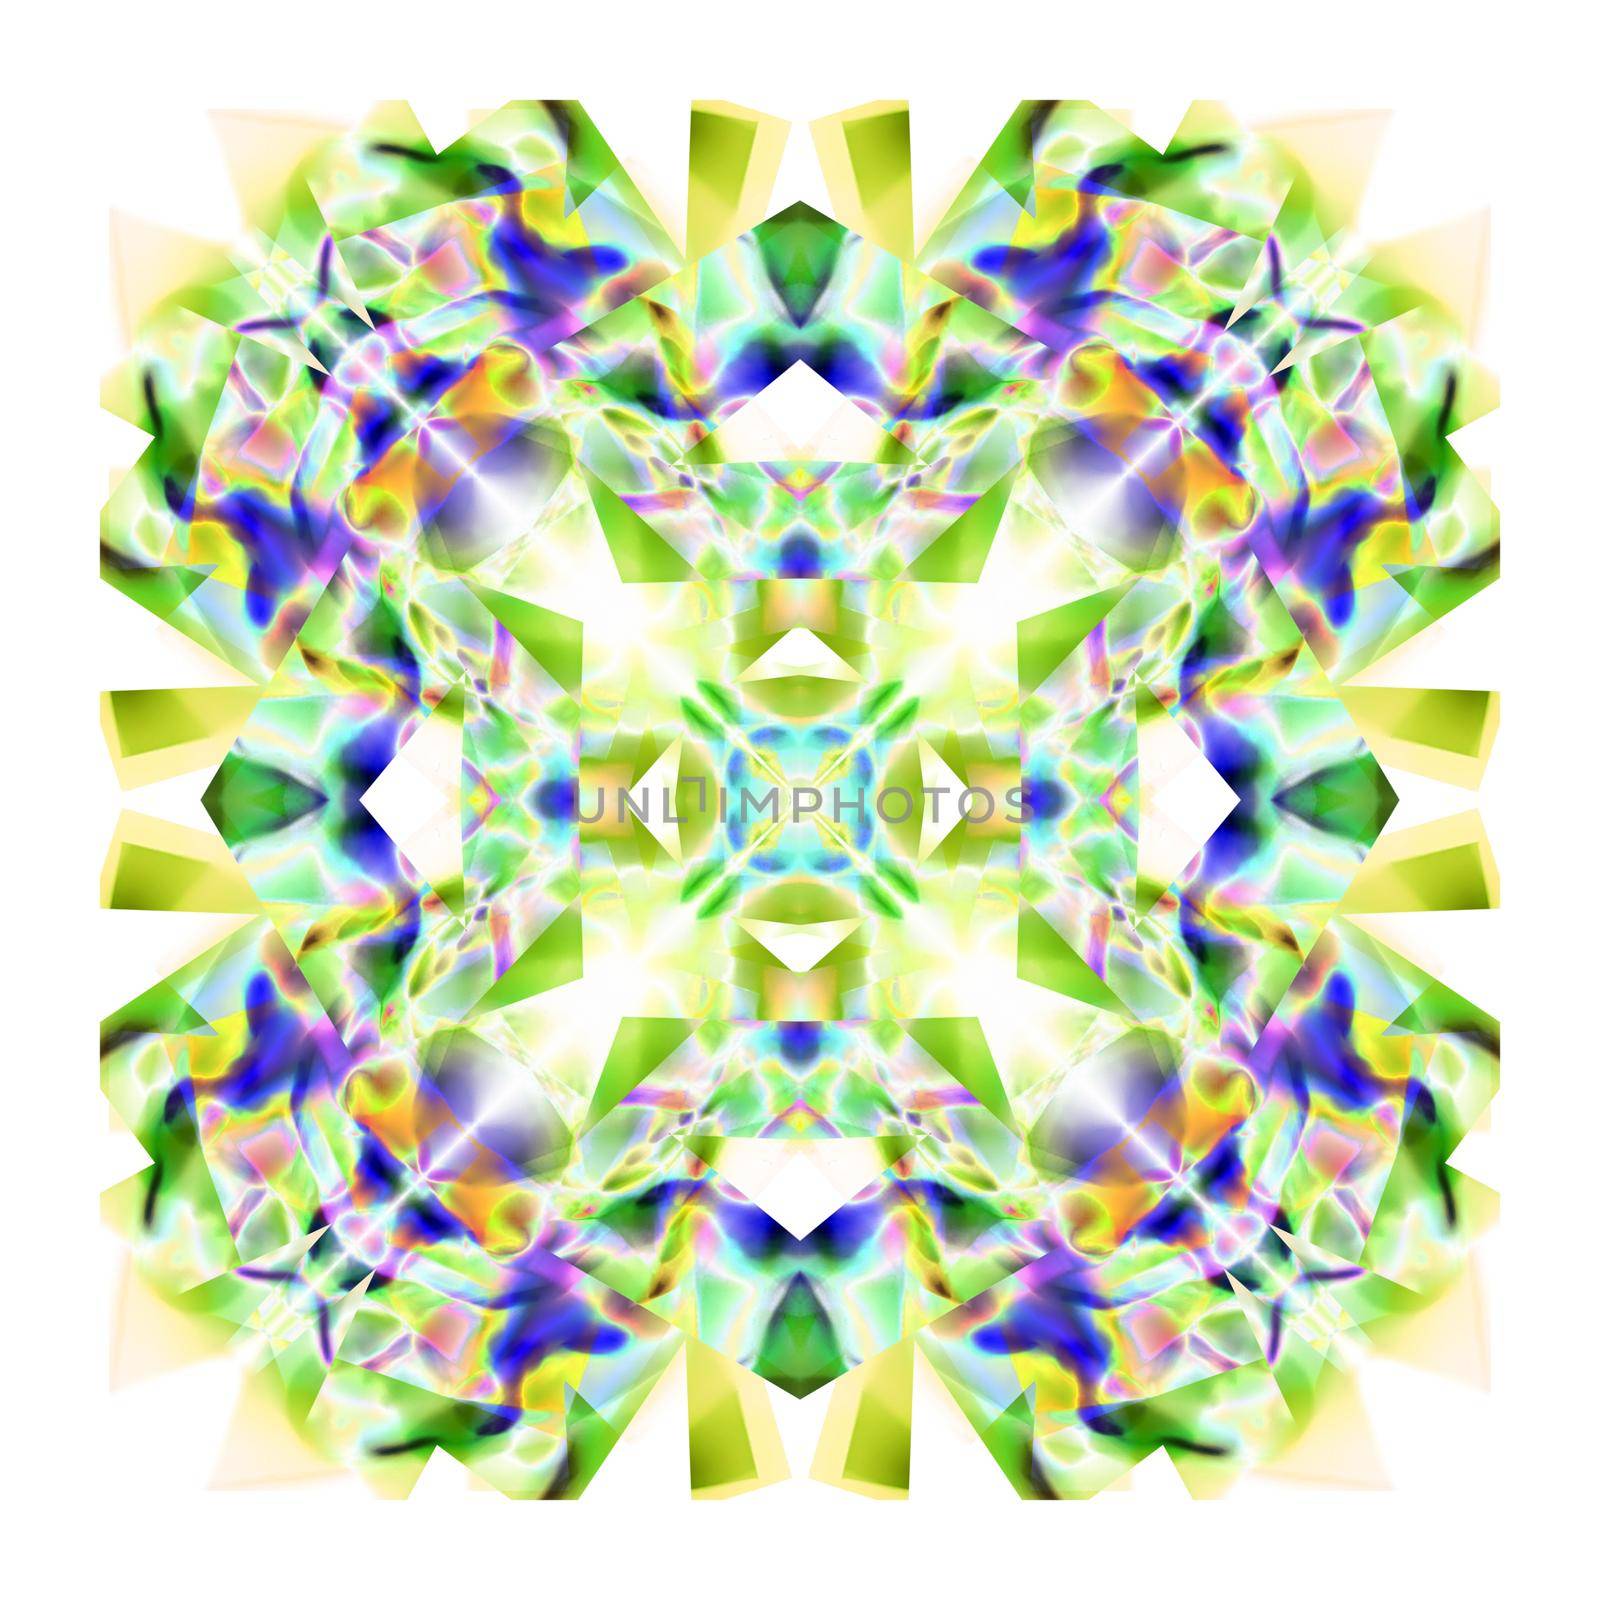 Abstract symmetric pattern background. The image with mirror effect. Kaleidoscopic abstract psychedelic design.